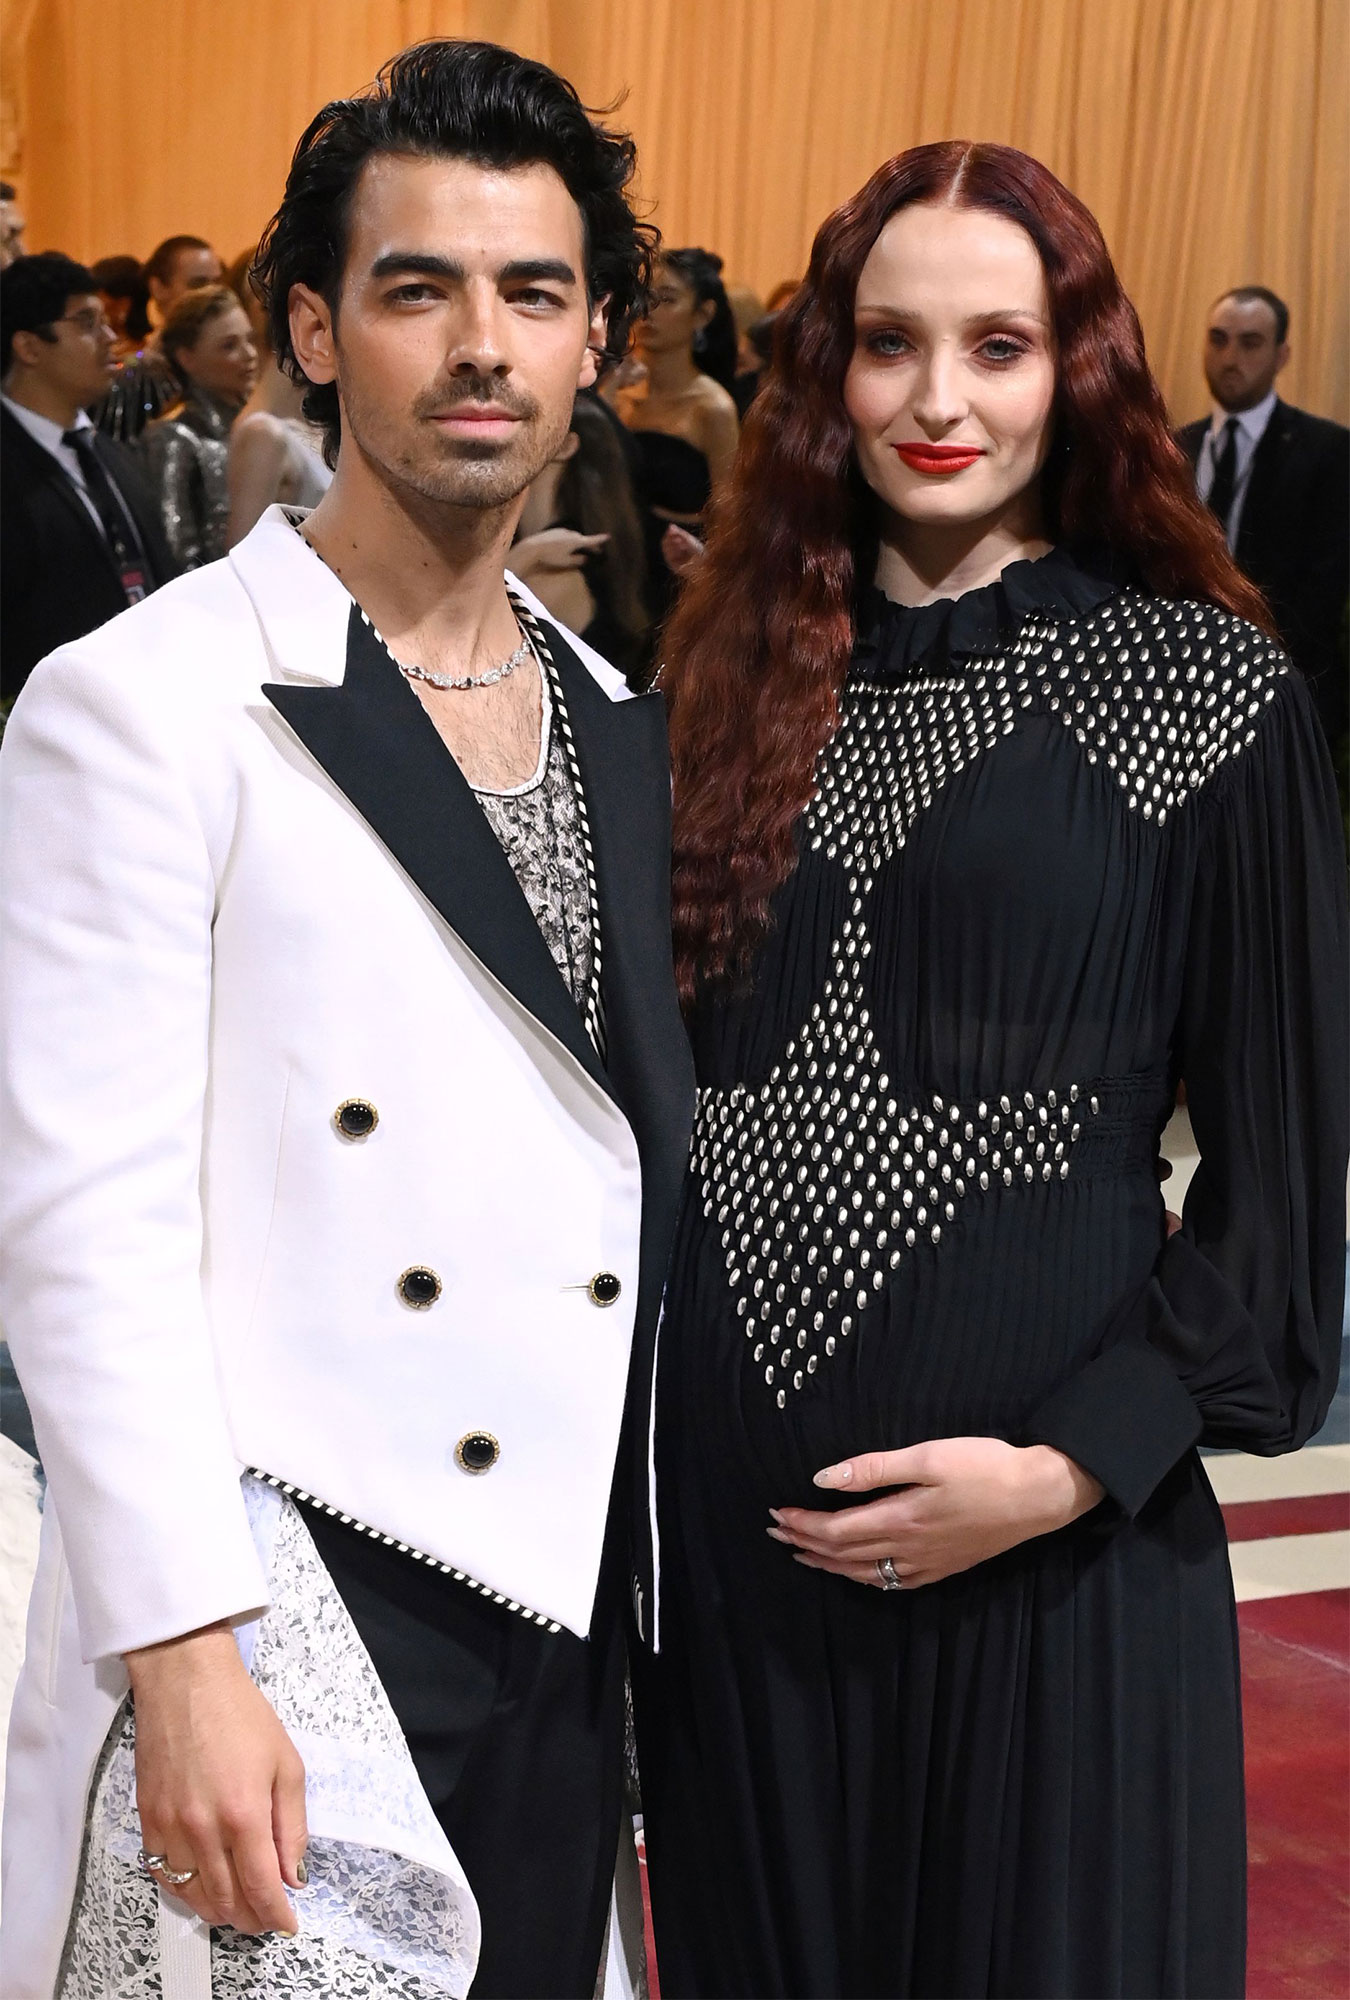 A Pregnant Sophie Turner & Joe Jonas Looked Dramatic in Black and White at  the Met Gala 2022. See Photos Here.